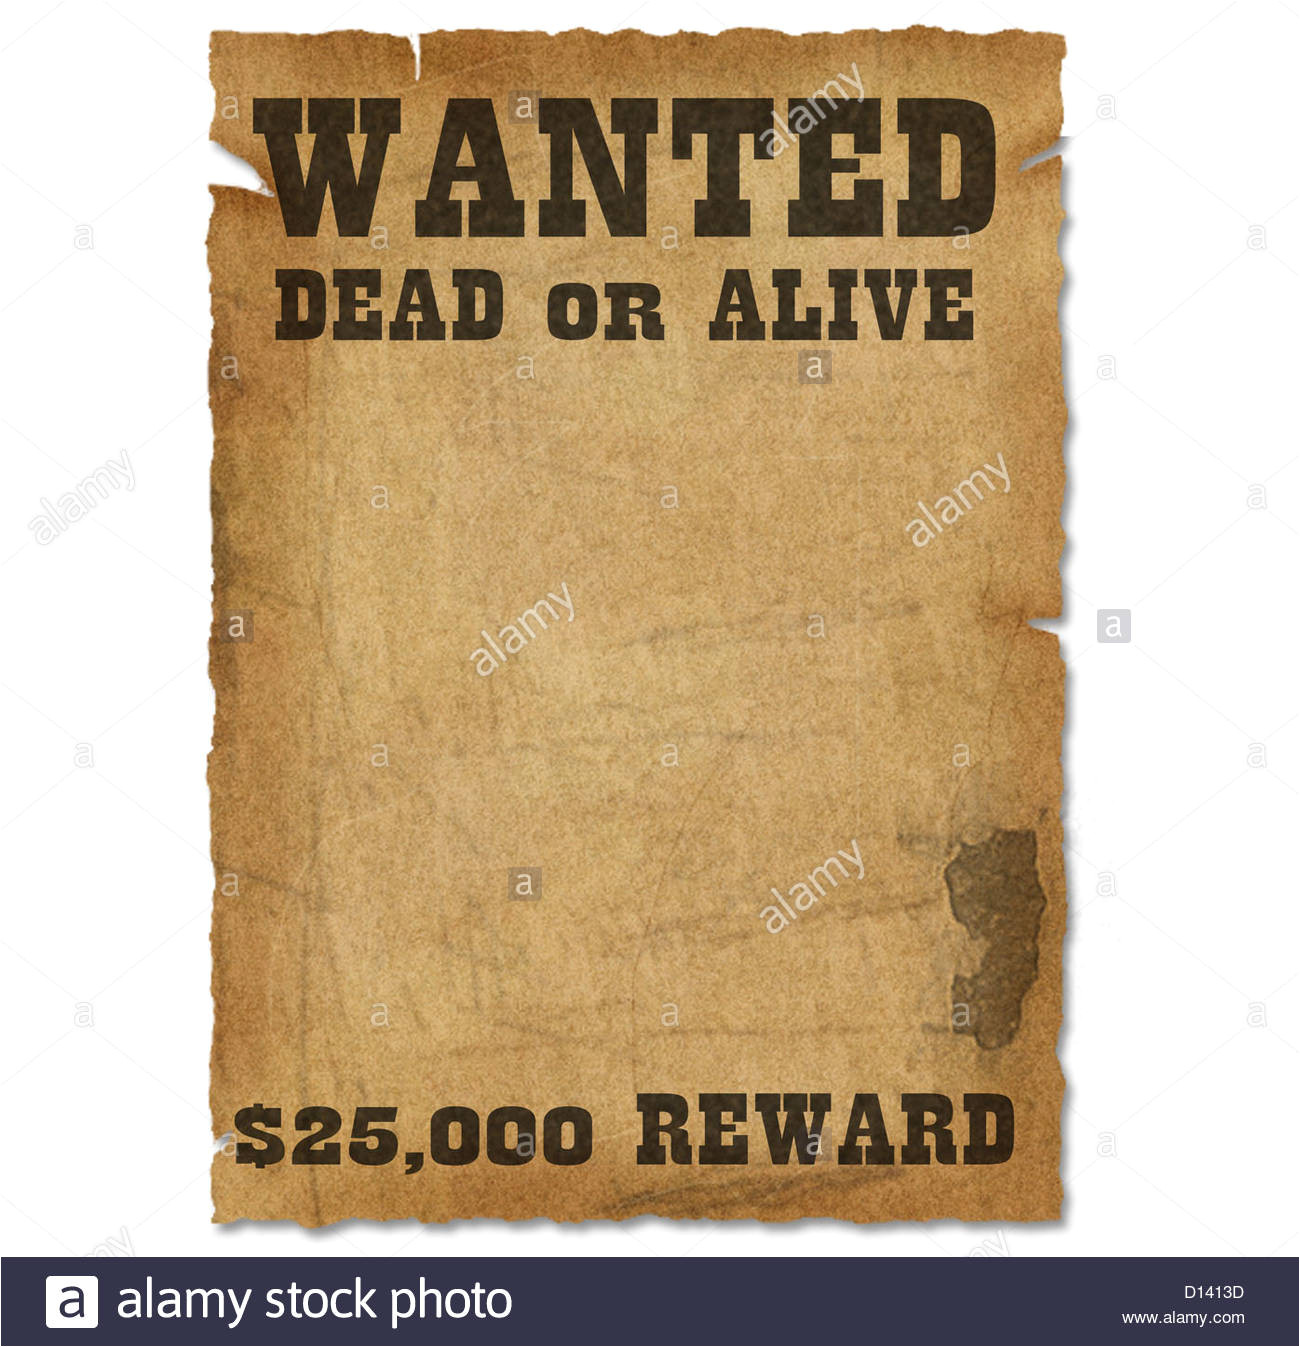 Reward Posters Template Wanted Poster Template with Bounty Reward Stock Photo